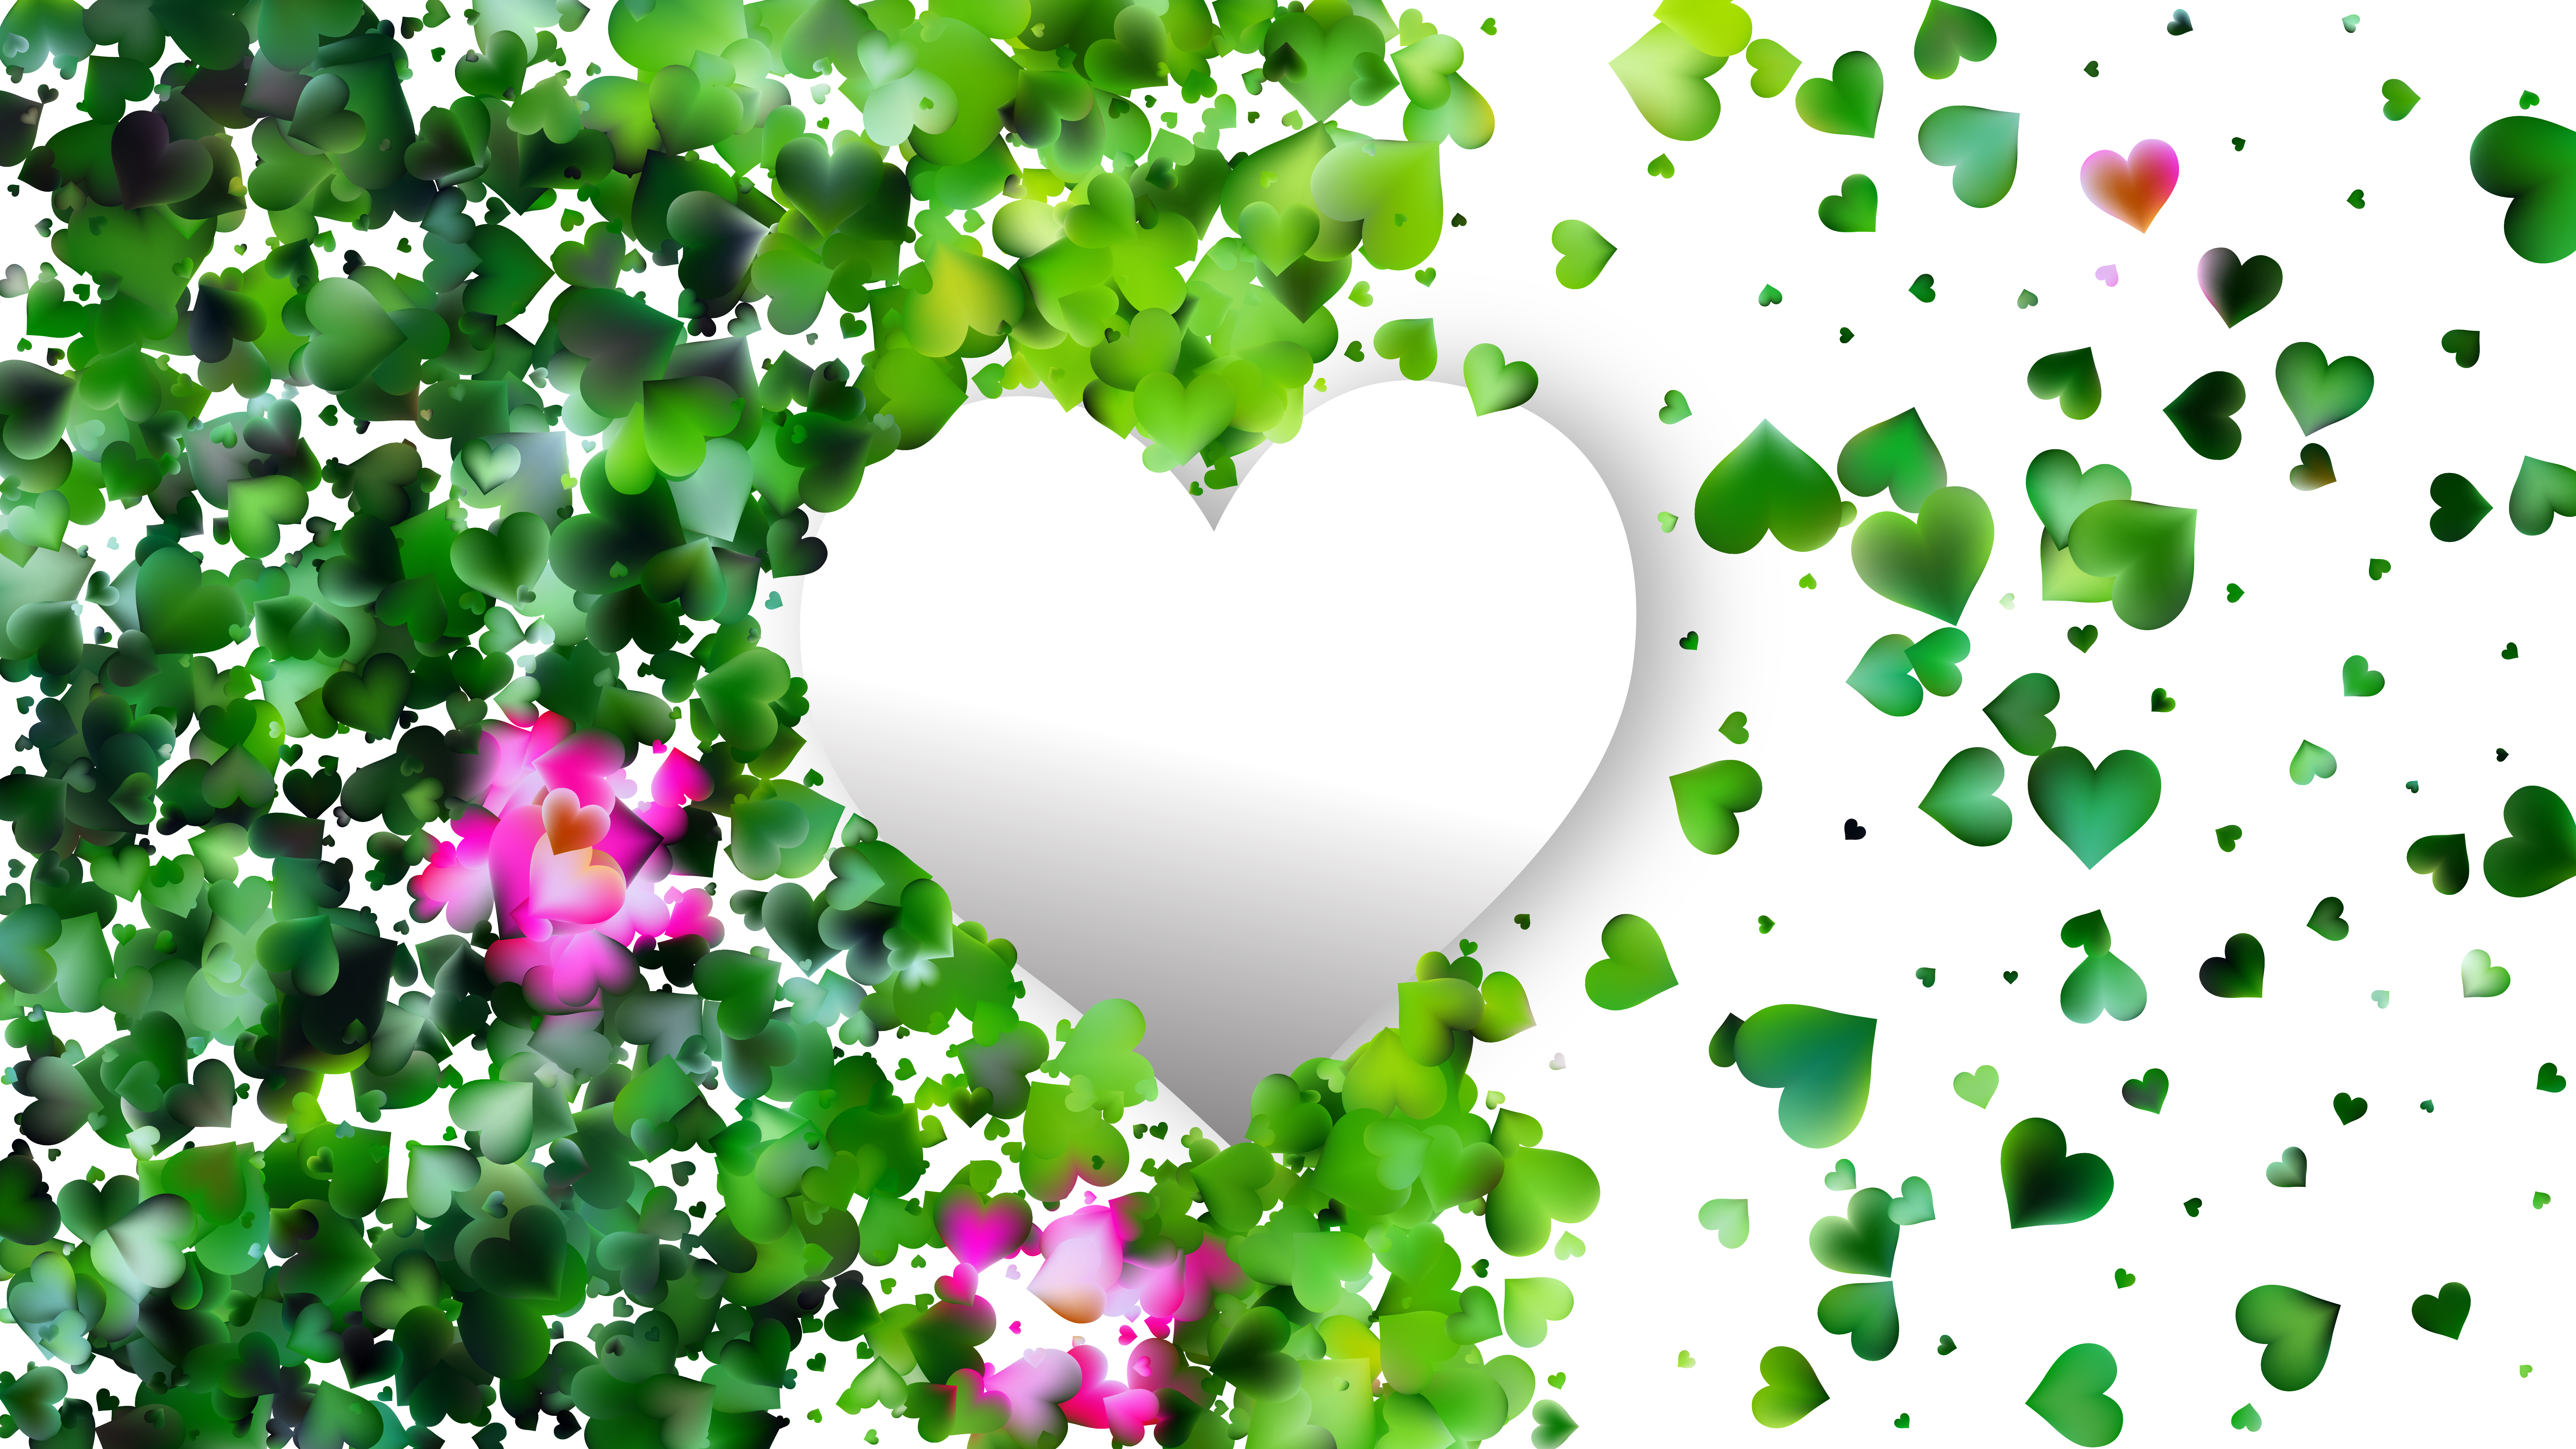 Free Green and White Heart Background Graphic